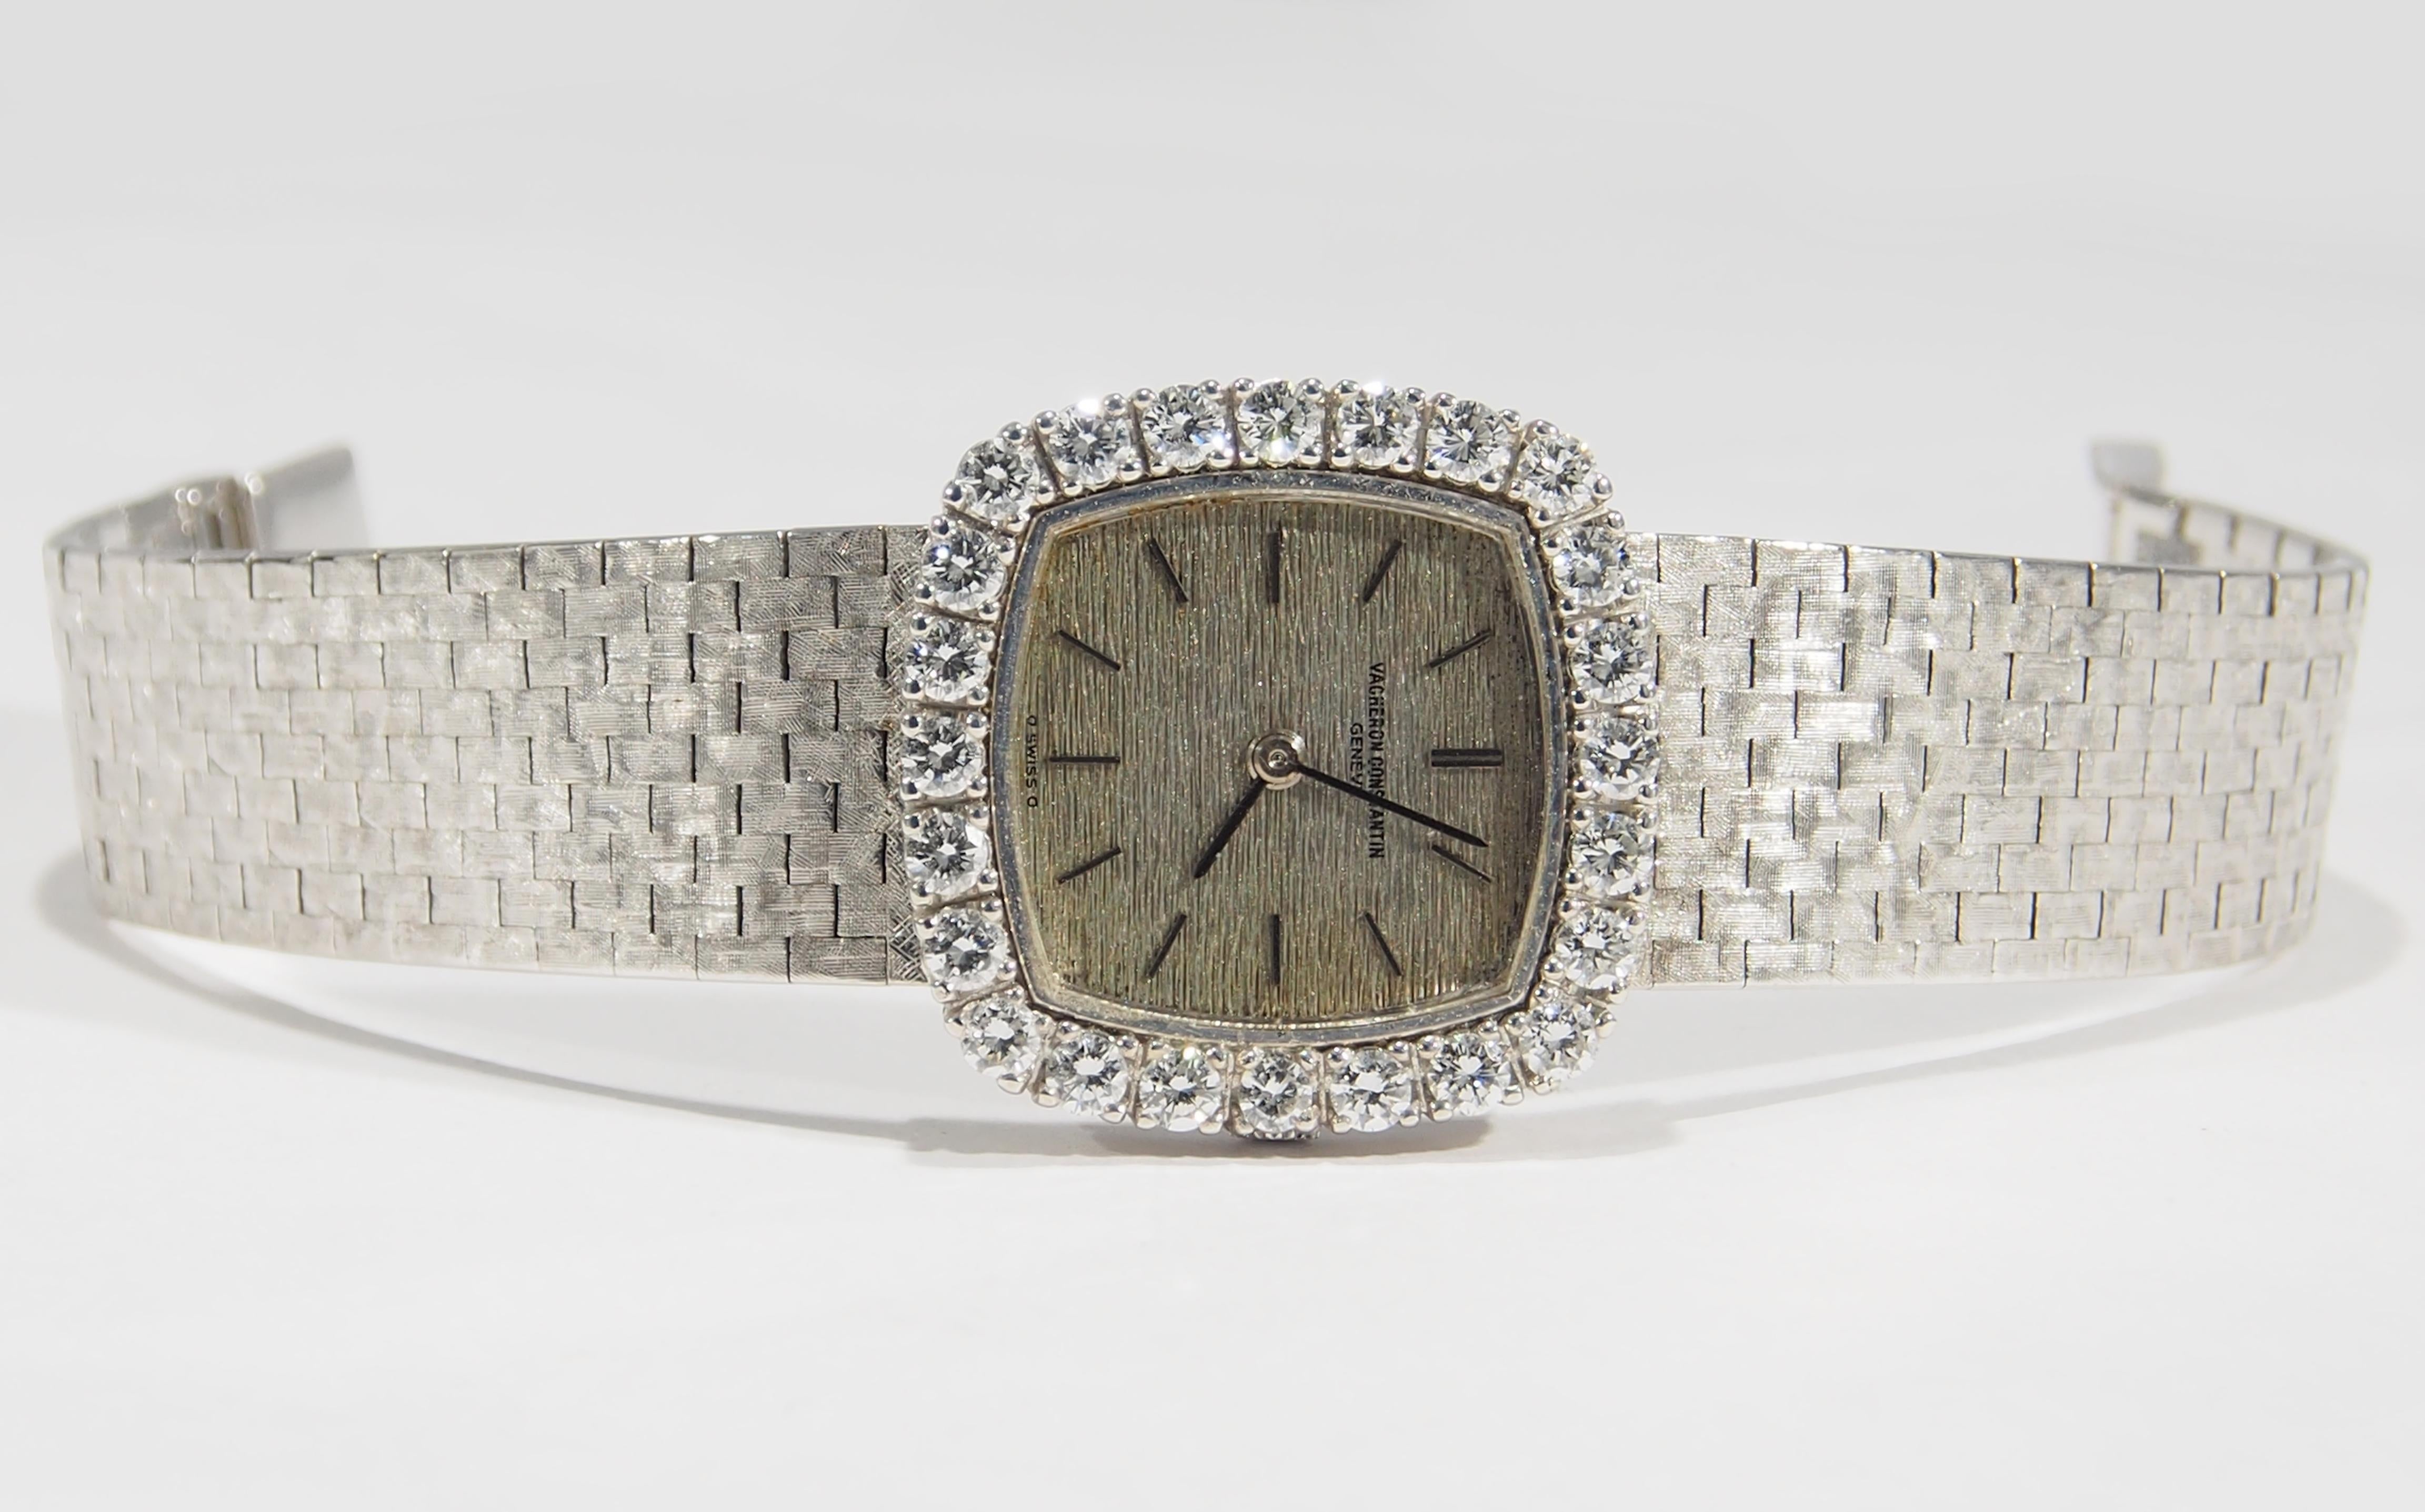 From the luxury Swiss Watch Maker, Vacheron & Constantin is this 18K White Gold Ladies Watch accented with (24) Round Brilliant Cut Diamonds, approximately 2.40ctw, G in Color, VS in Clarity. This special Vintage Watch was created in 1960 with the